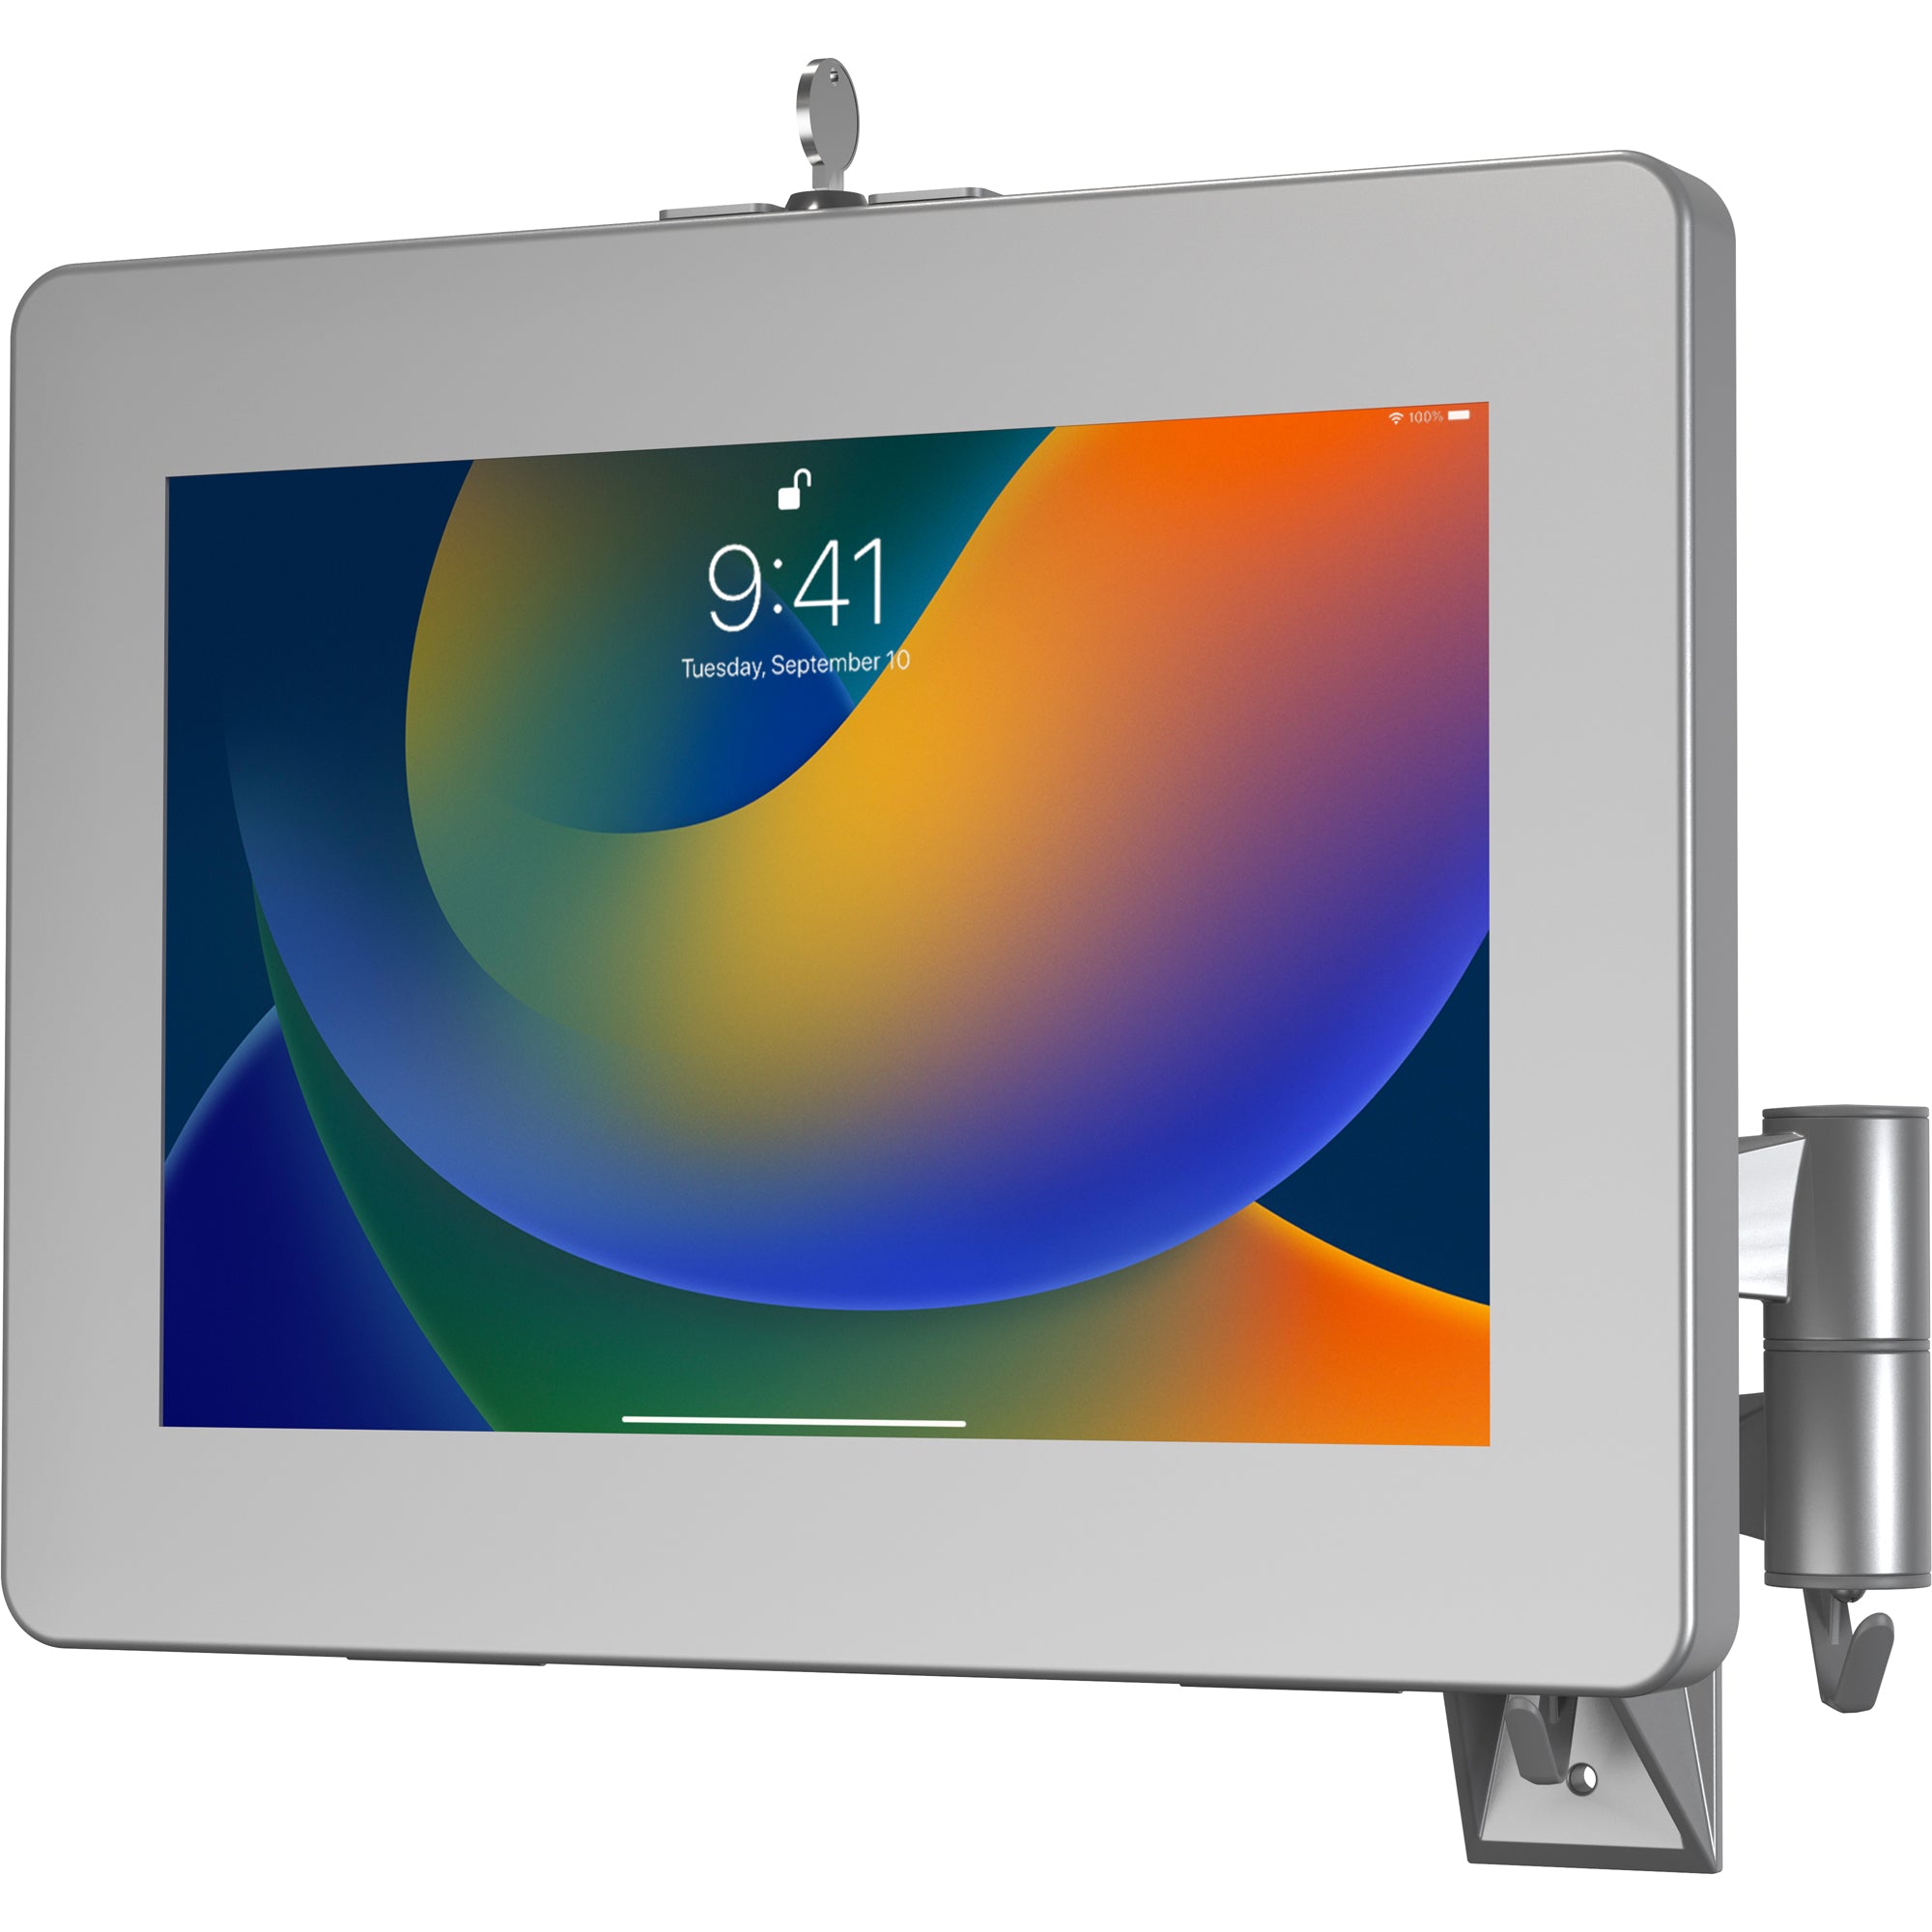 VESA Wall Mount Arm with Enclosure for iPad Air 11 inch - M2 (2024), iPad Pro 11 inch - M4 (2024) and more